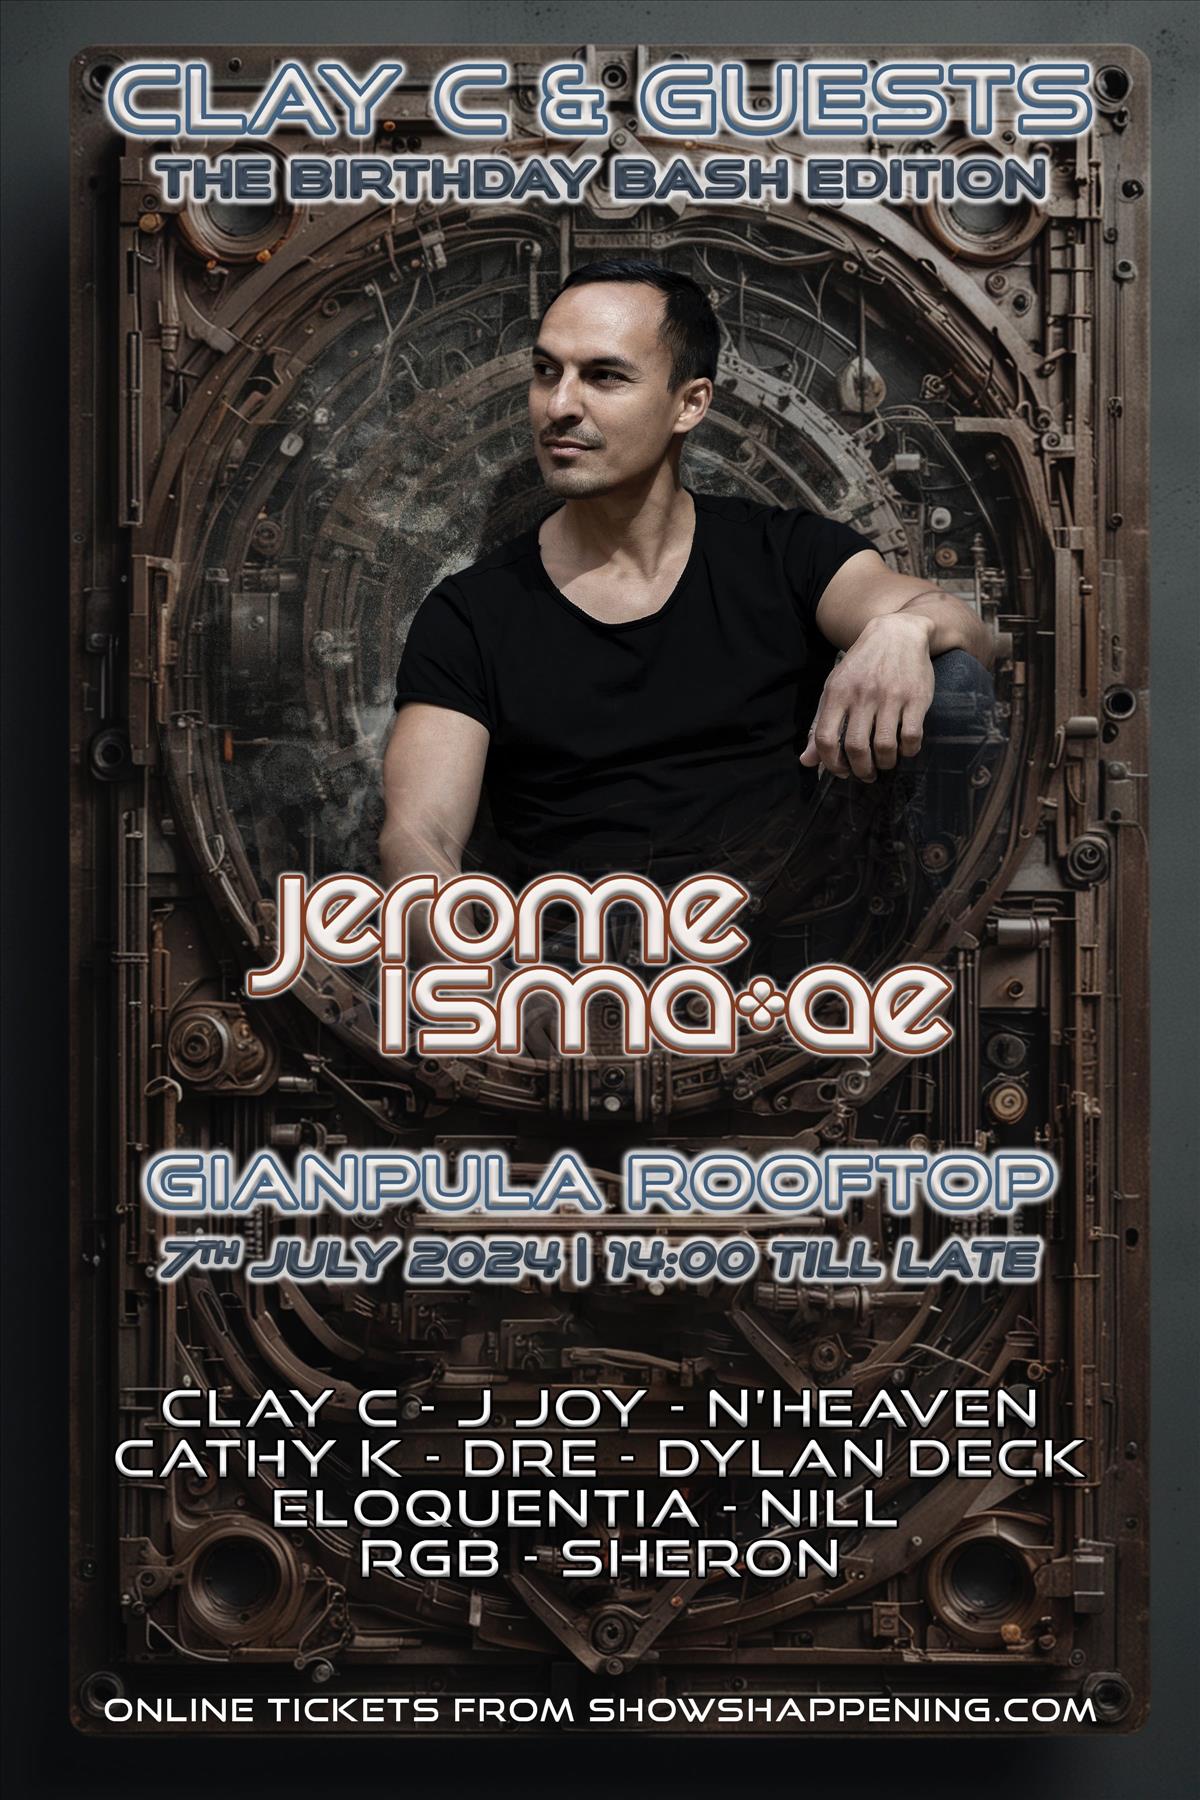 Clay C & Guests - The Birthday Bash Edition With Jerome Isma-ae poster